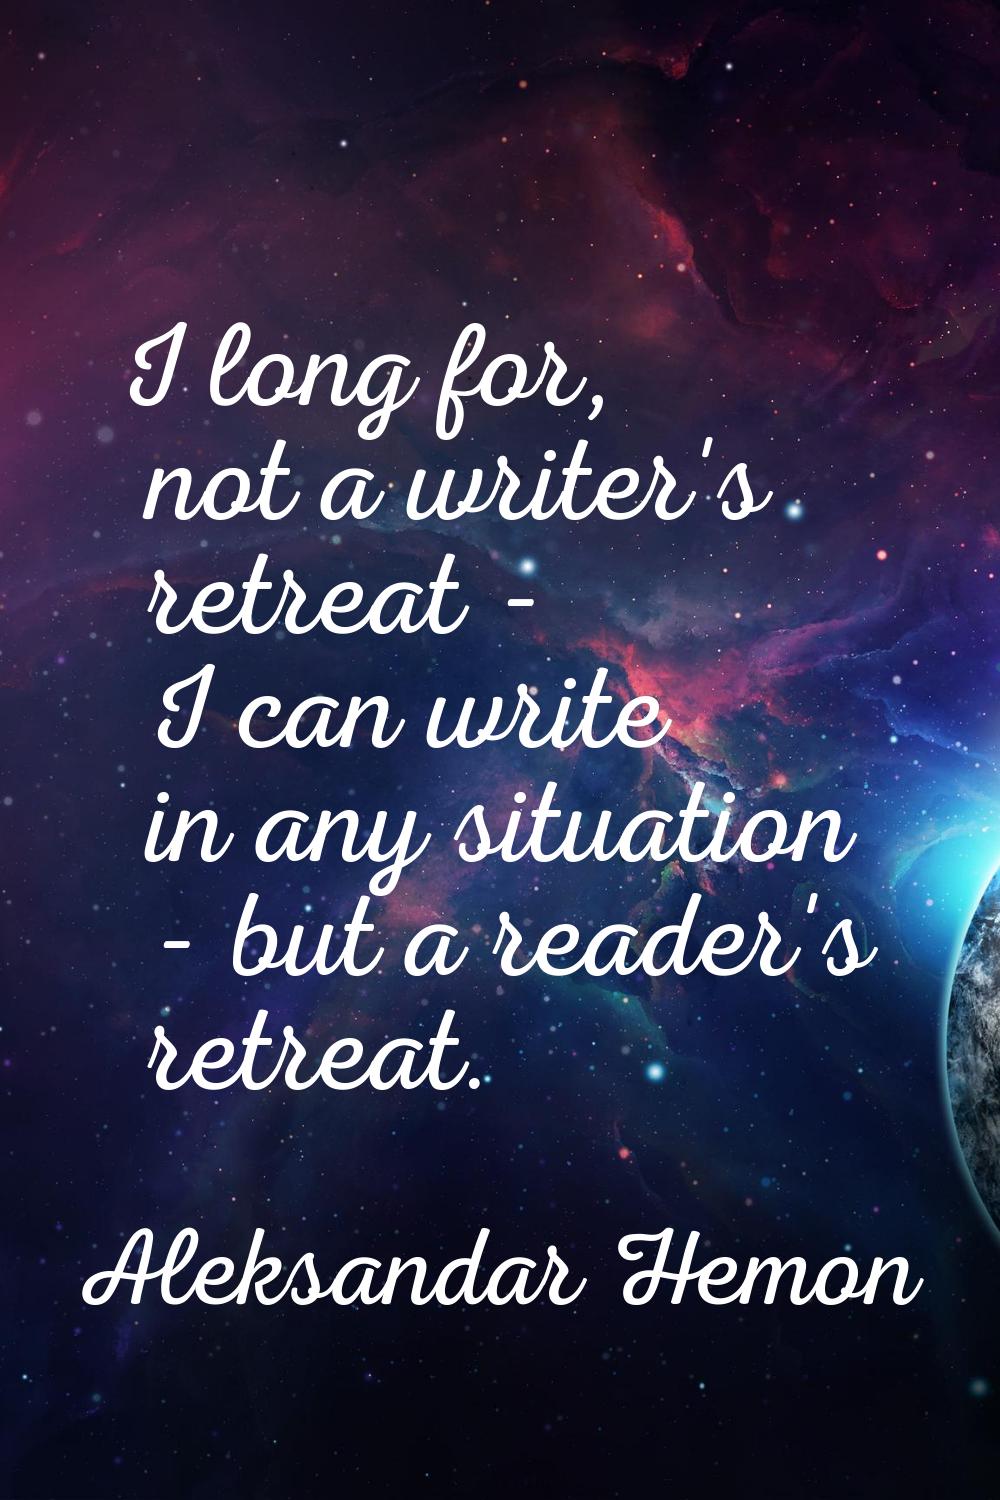 I long for, not a writer's retreat - I can write in any situation - but a reader's retreat.